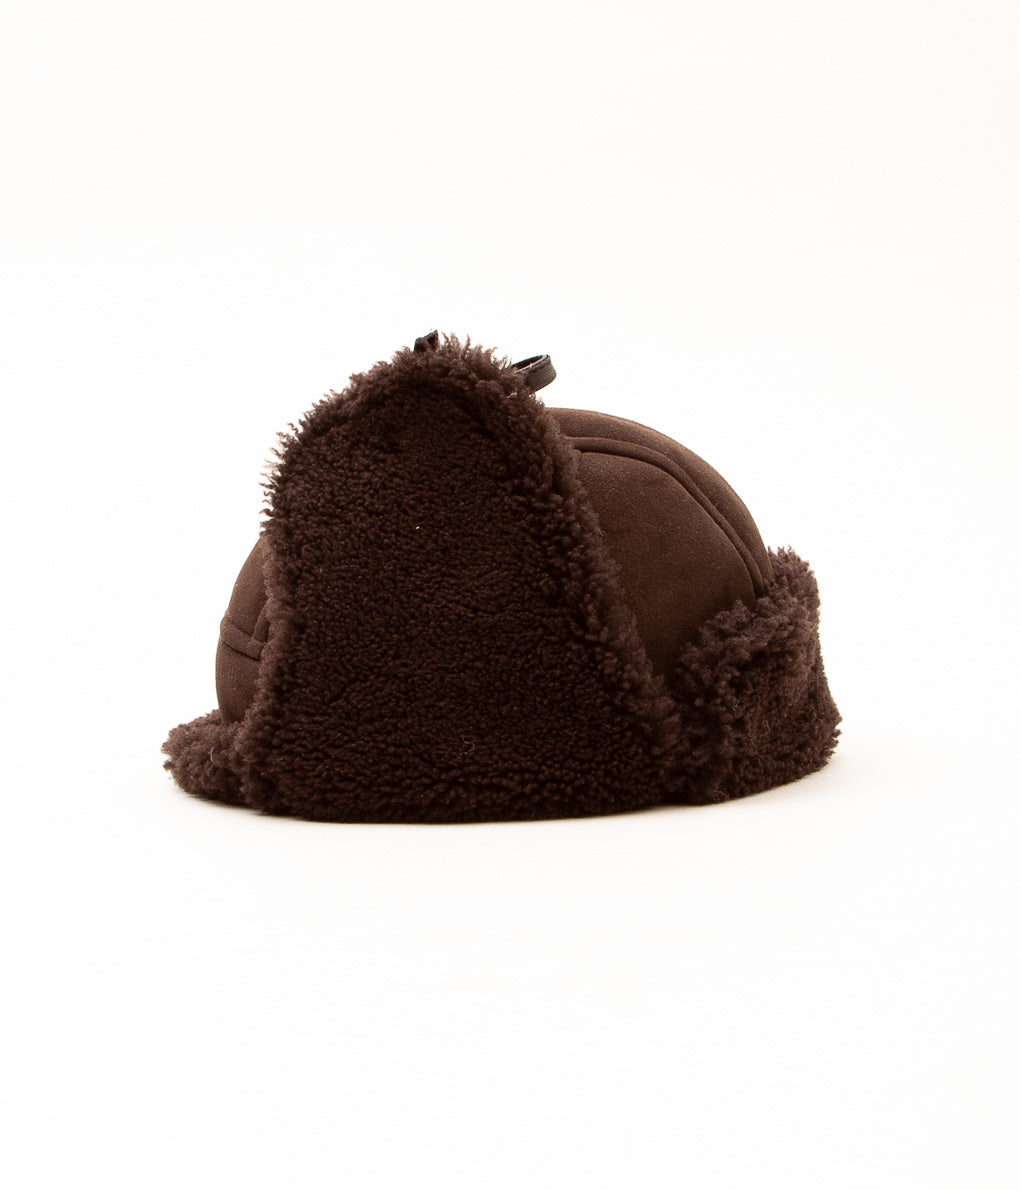 CAWLEY "HEEPSKIN UNISEX TRAPPER HAT WITH LEATHER TIES"(CHOCOLATE SUEDE)